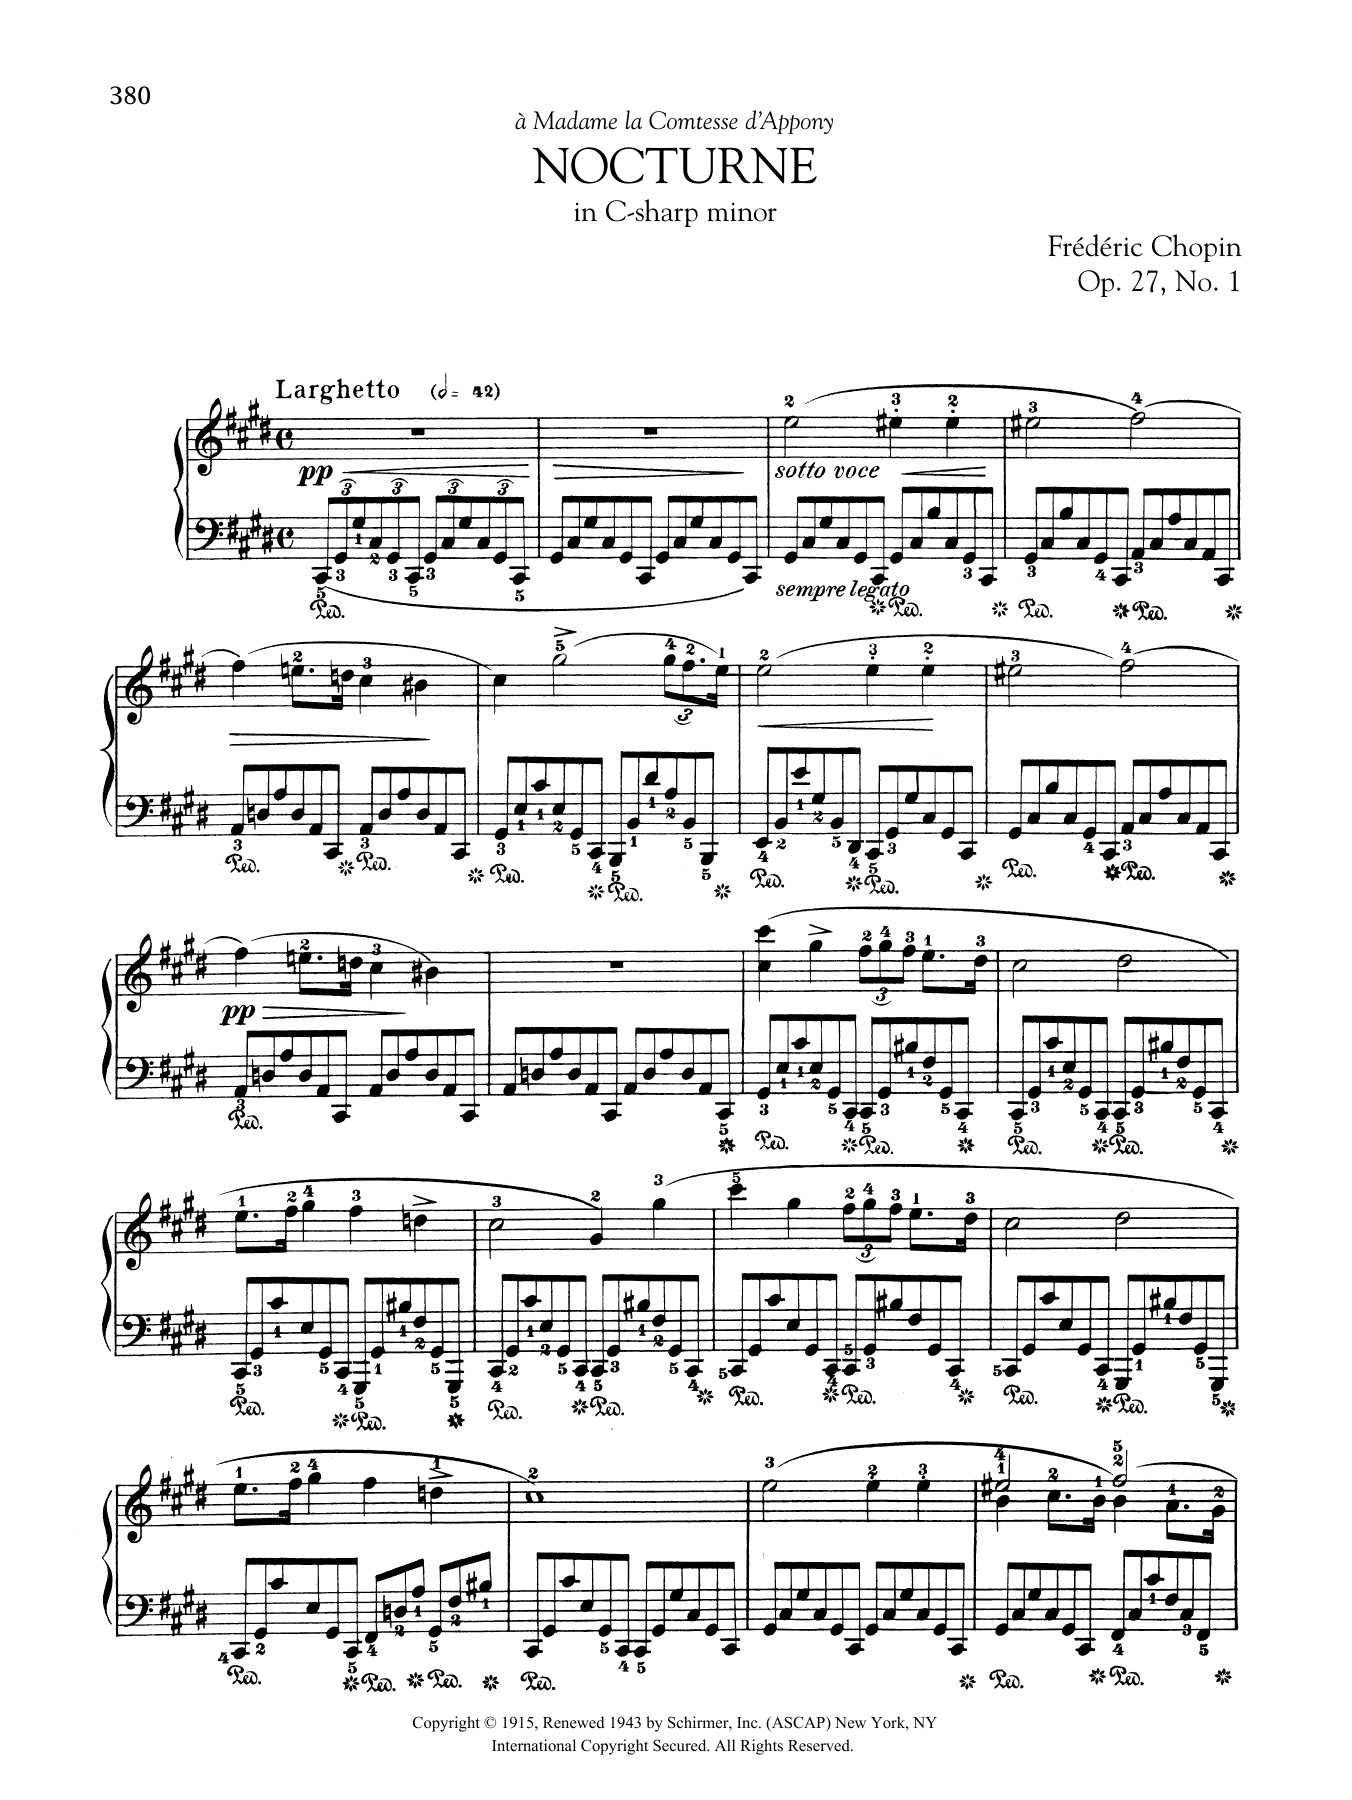 Download Frederic Chopin Nocturne in C-sharp minor, Op. 27, No. Sheet Music